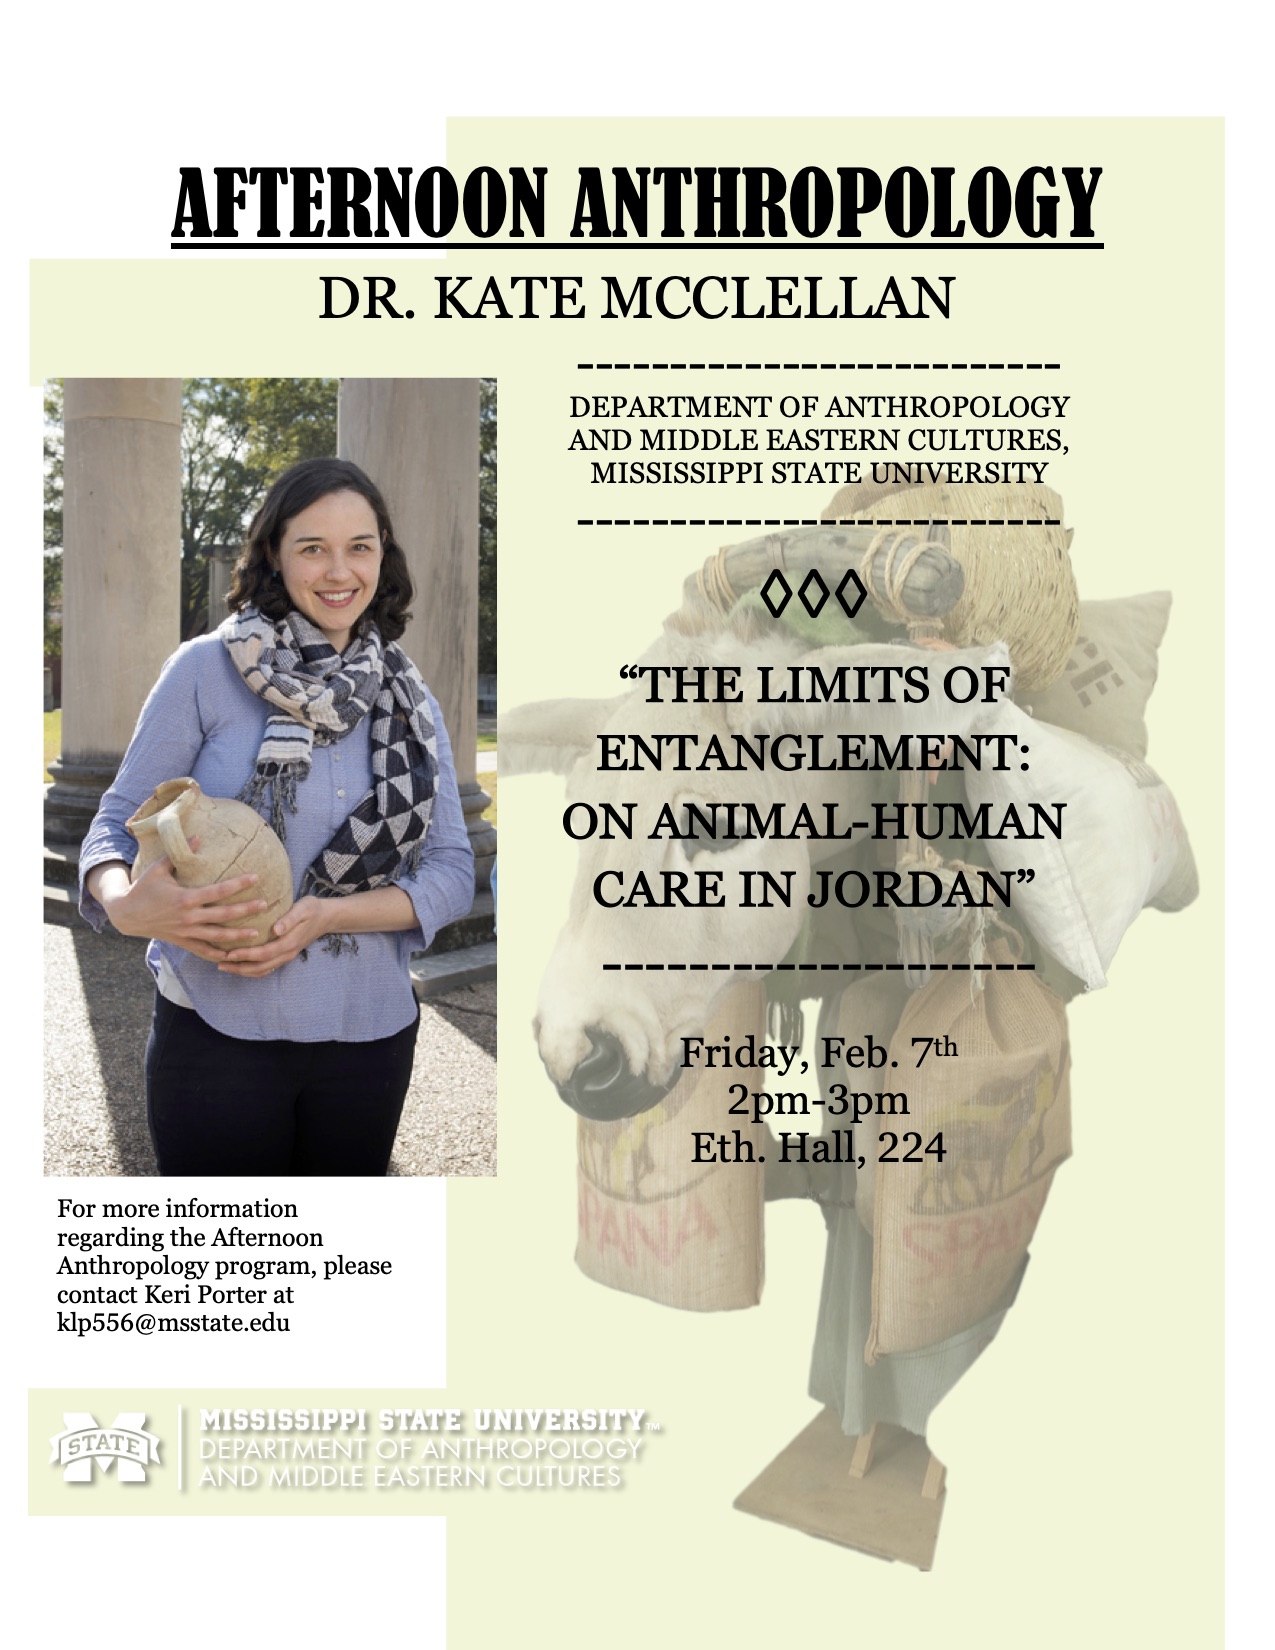 Dr. Kate McClellan Afternoon Anthropology Flyer